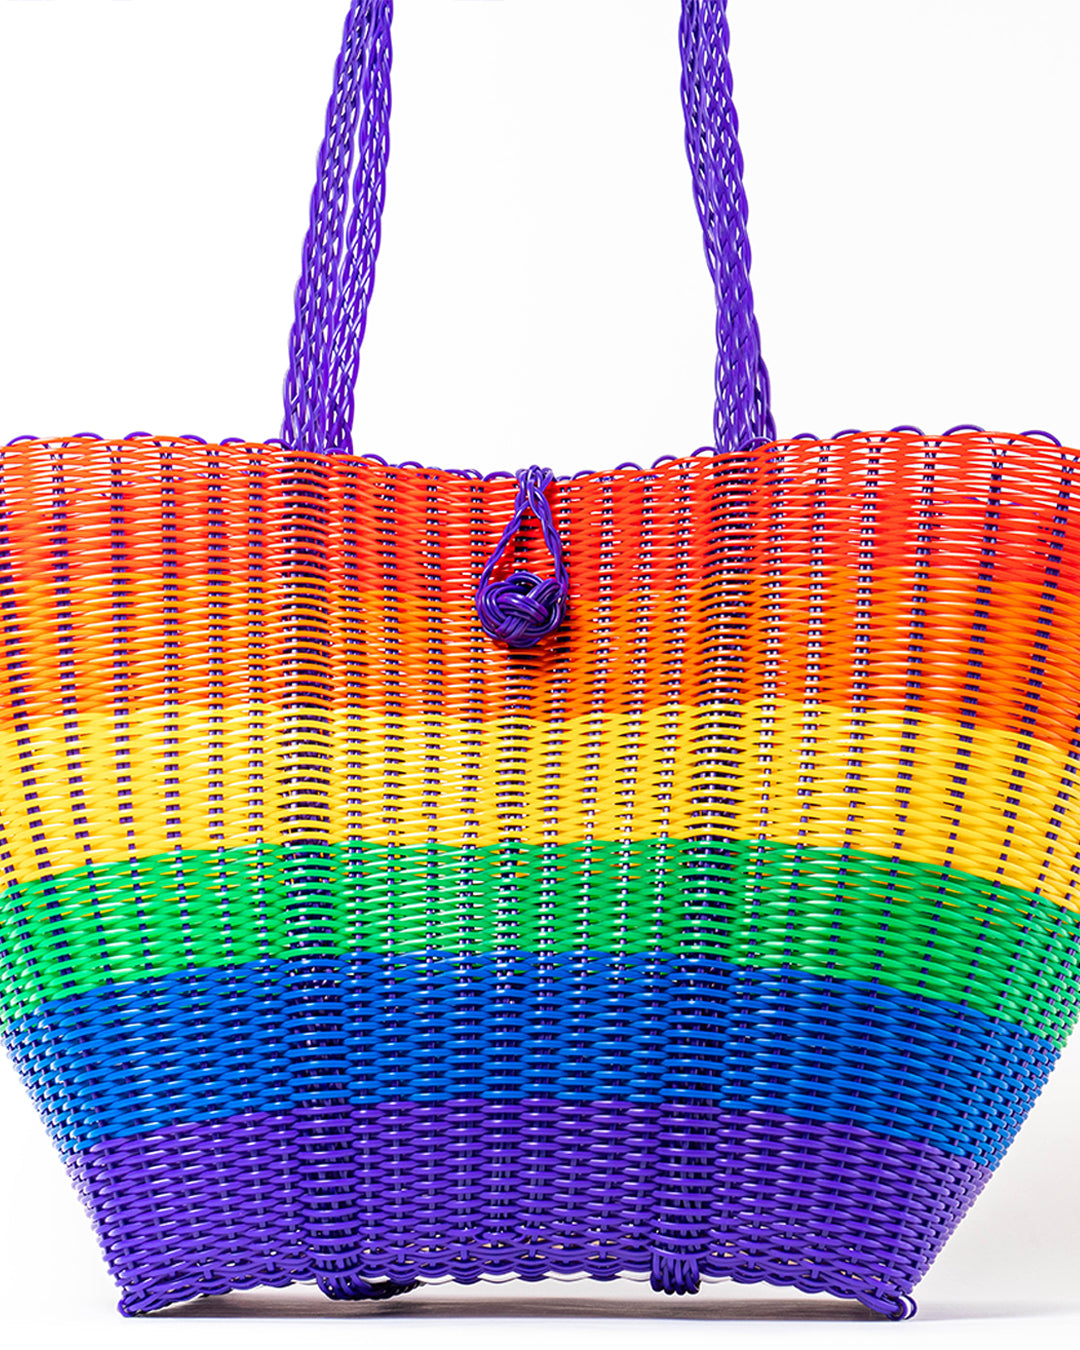 White & Rainbow Stripe Tote Bag by Rose Gold